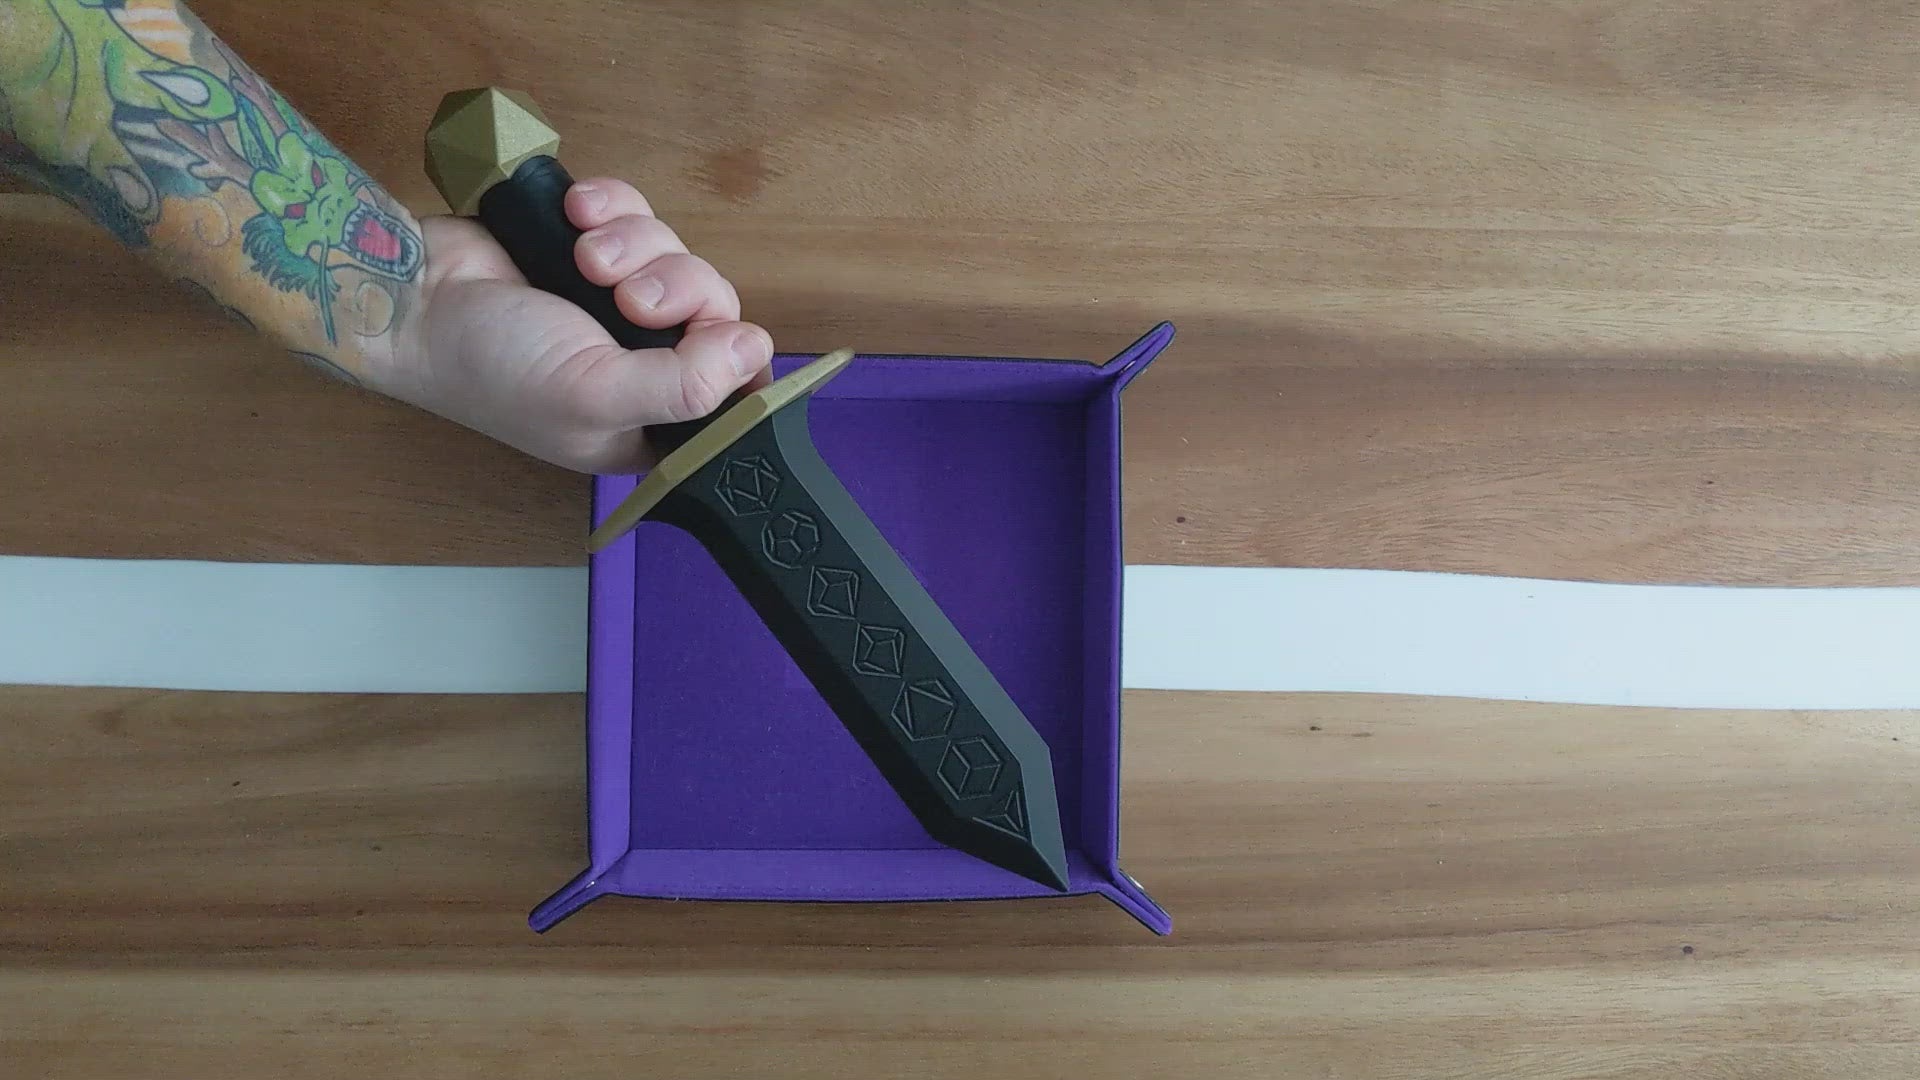 Demonstrating our dice dagger in action - each dagger holds a set of RPG dice in the blade, with a removable pommel for extra storage in the handle!